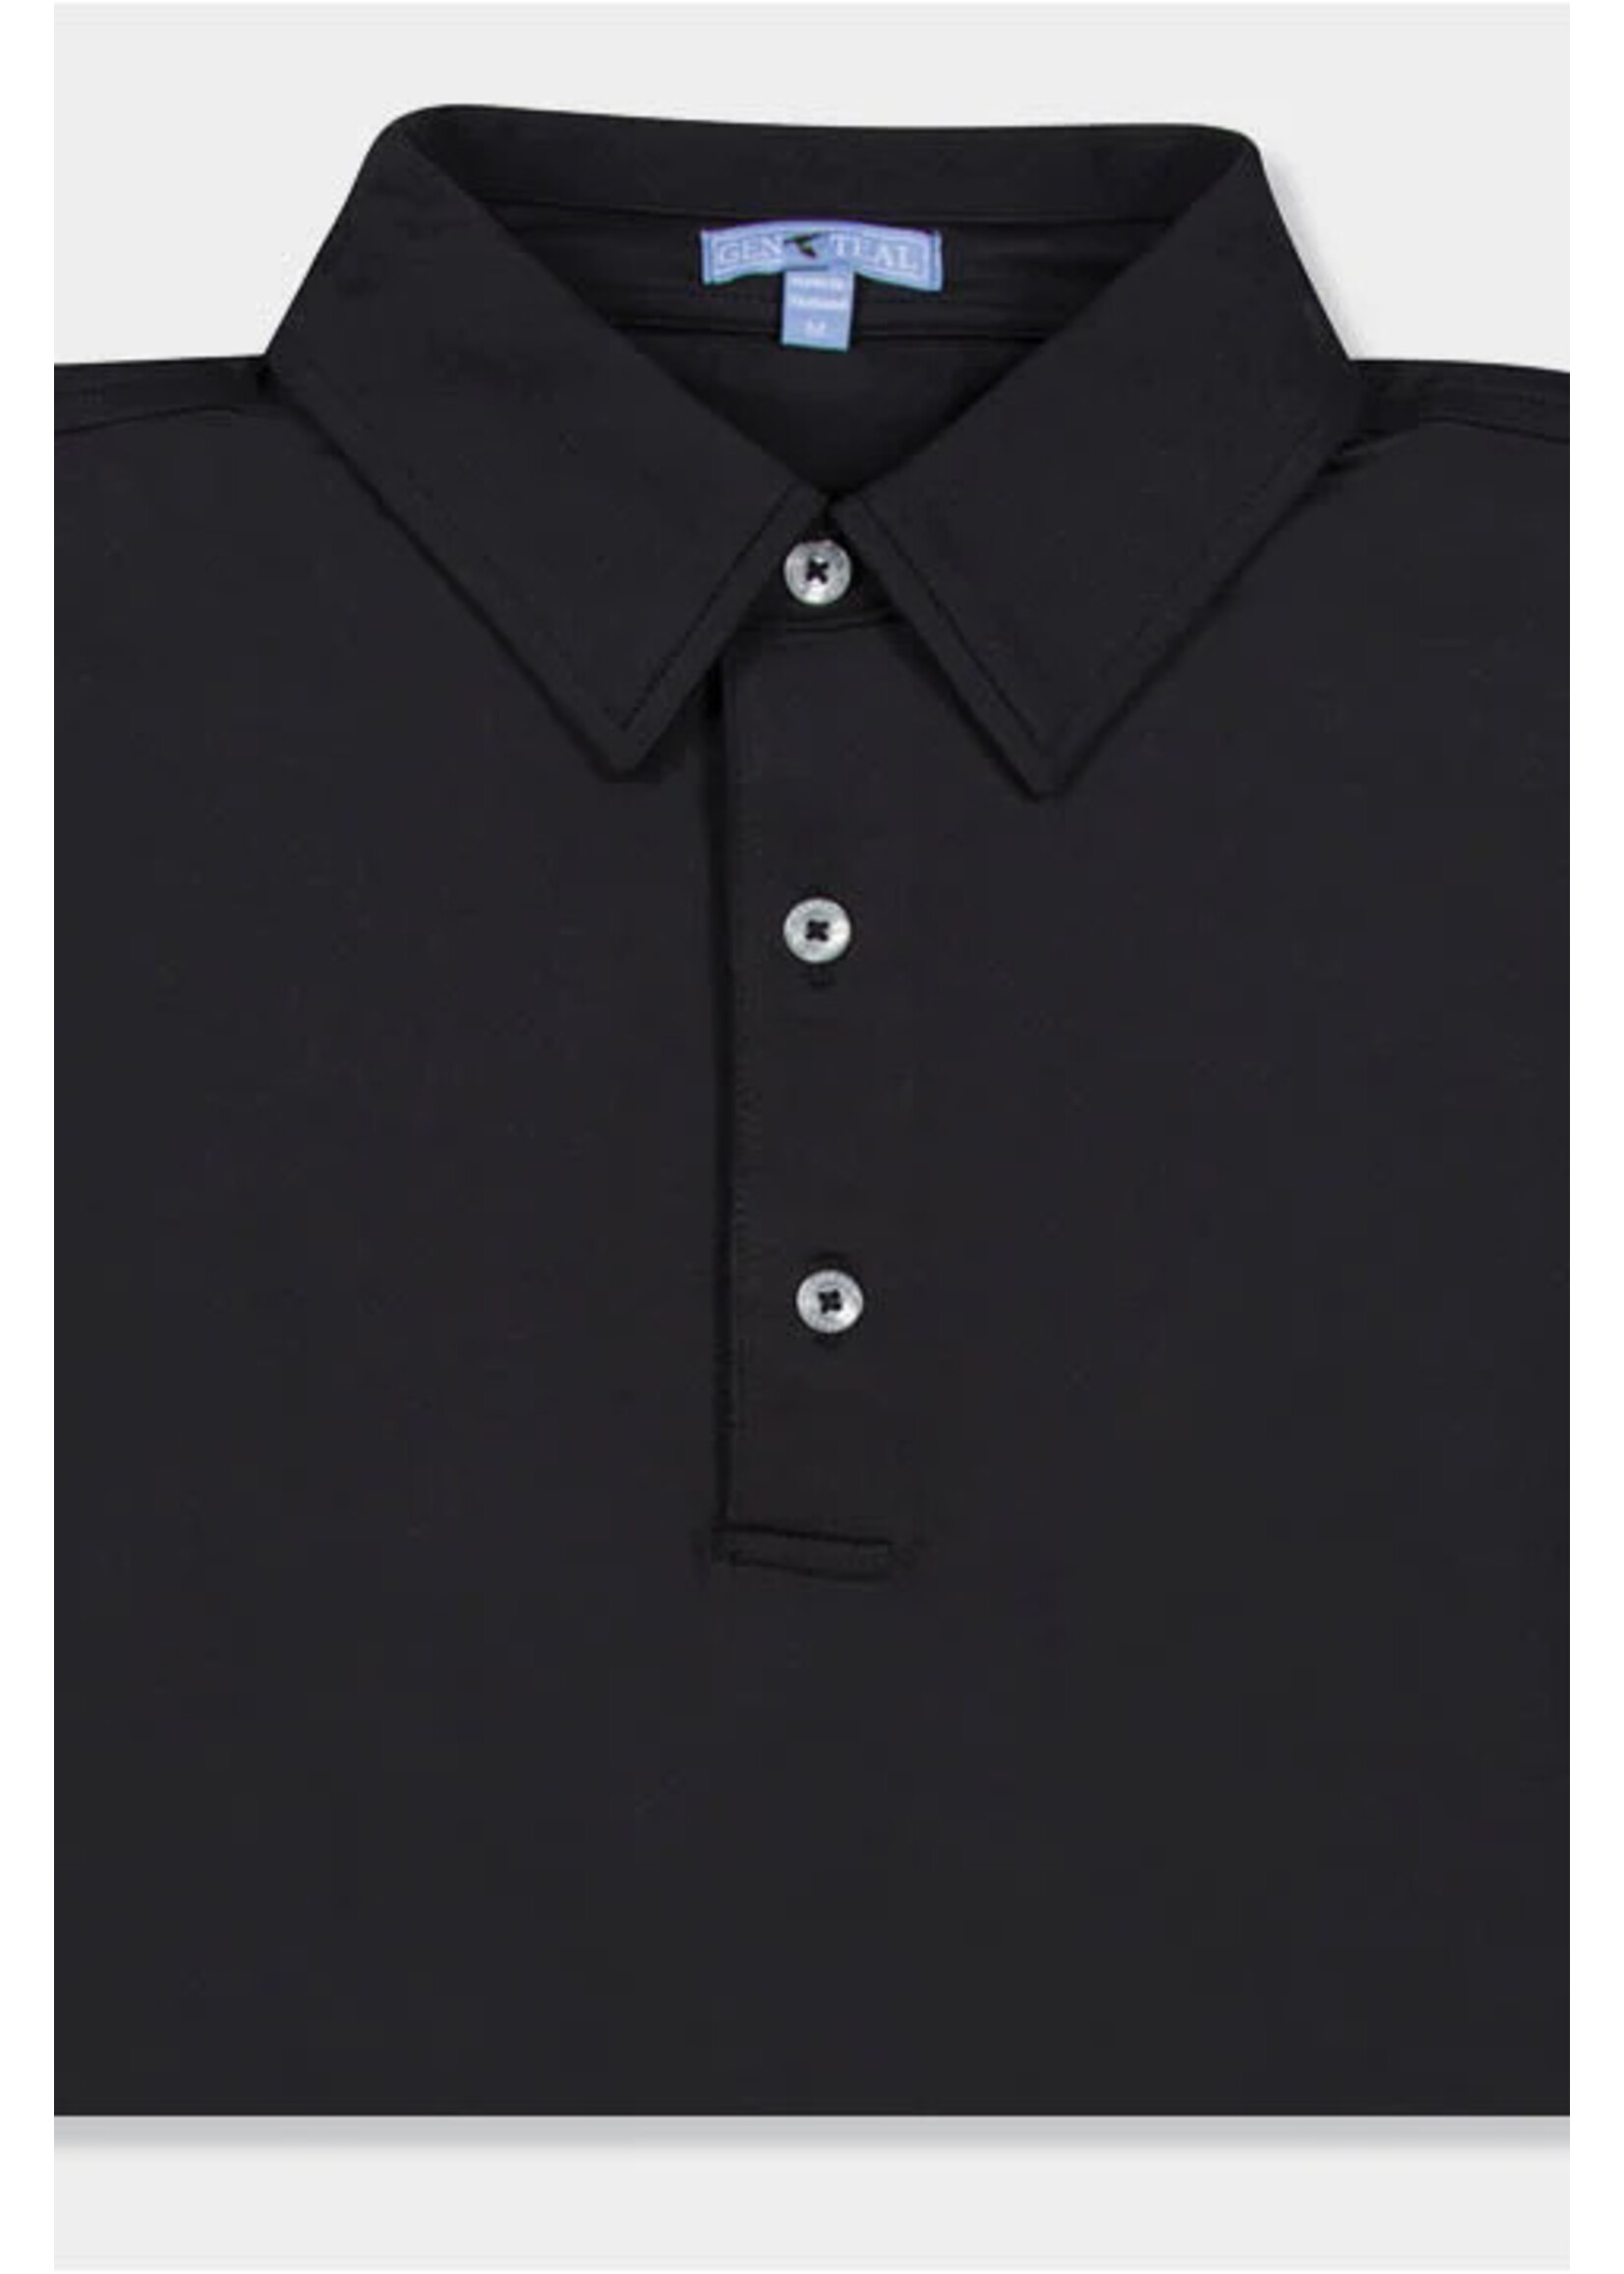 GenTeal Apparel Solid Performance Polo